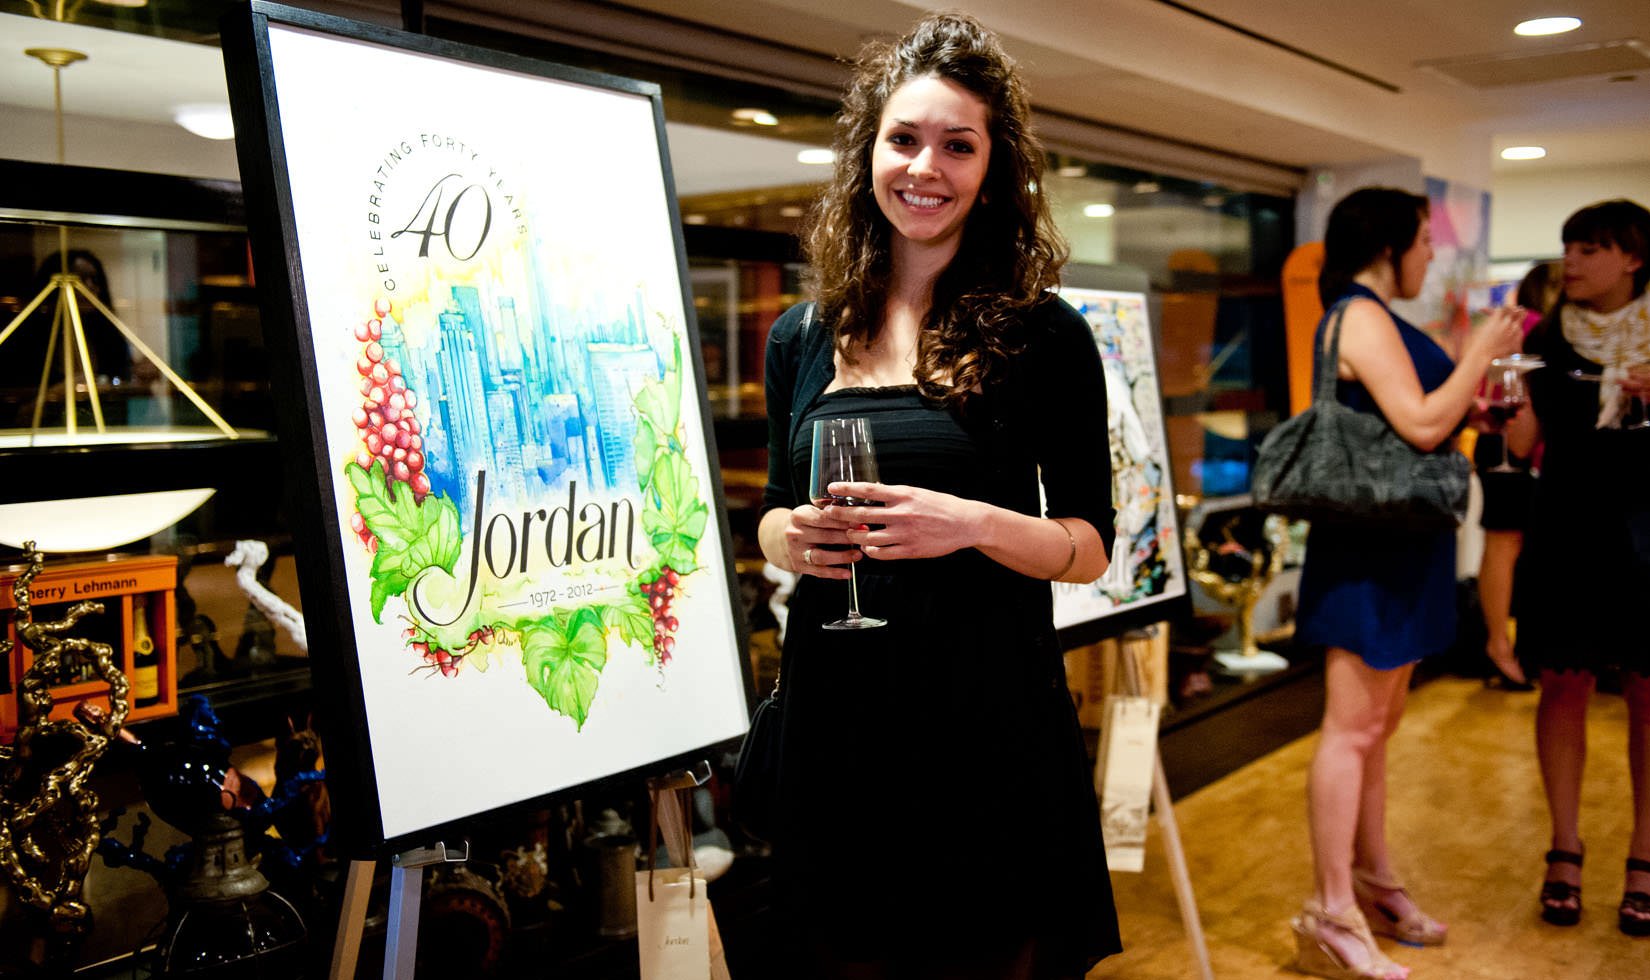 Stephanie Mead posing next to her art piece "Celebrate!" which won grand prize at the 4 on 4 New York